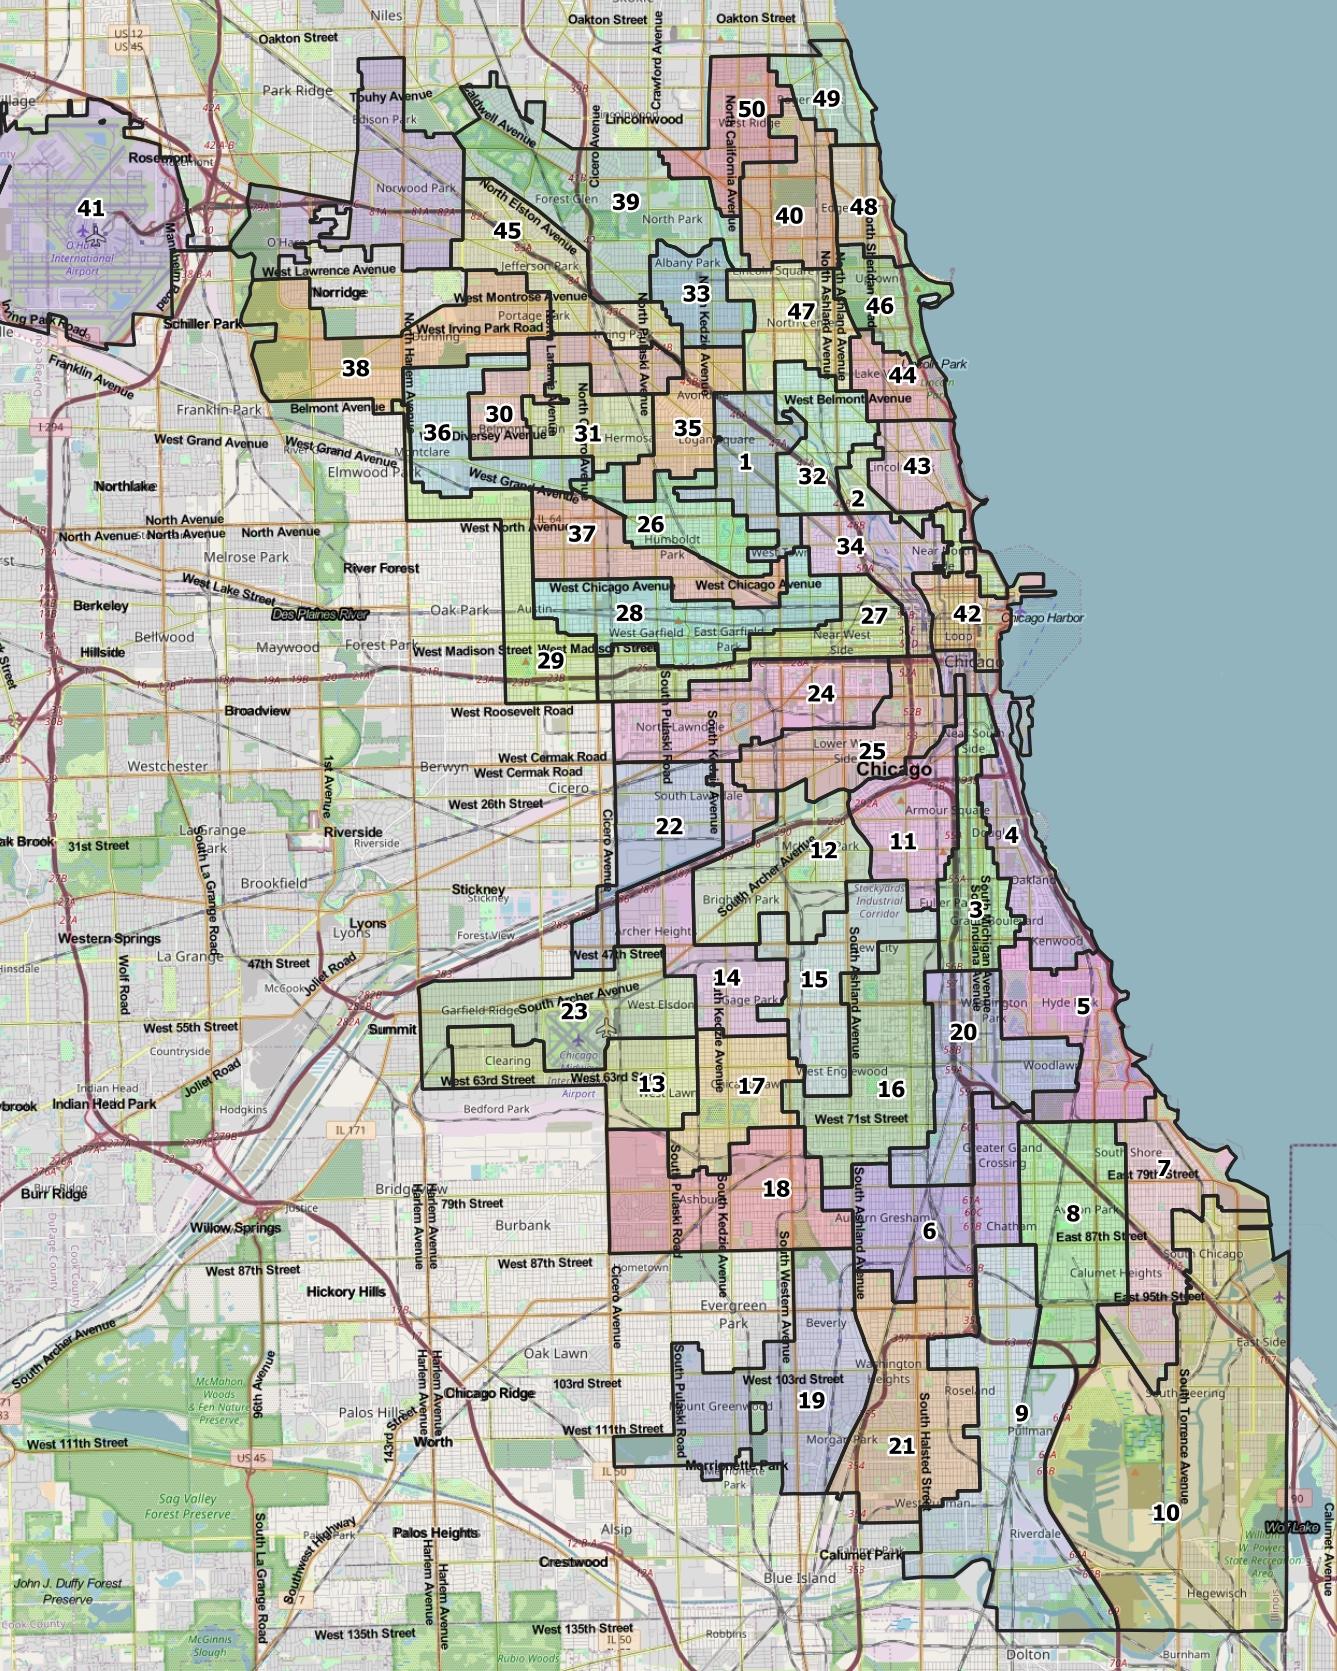 A proposed Chicago Ward Map from the Chicago City Council's Latino Caucus. [Provided]